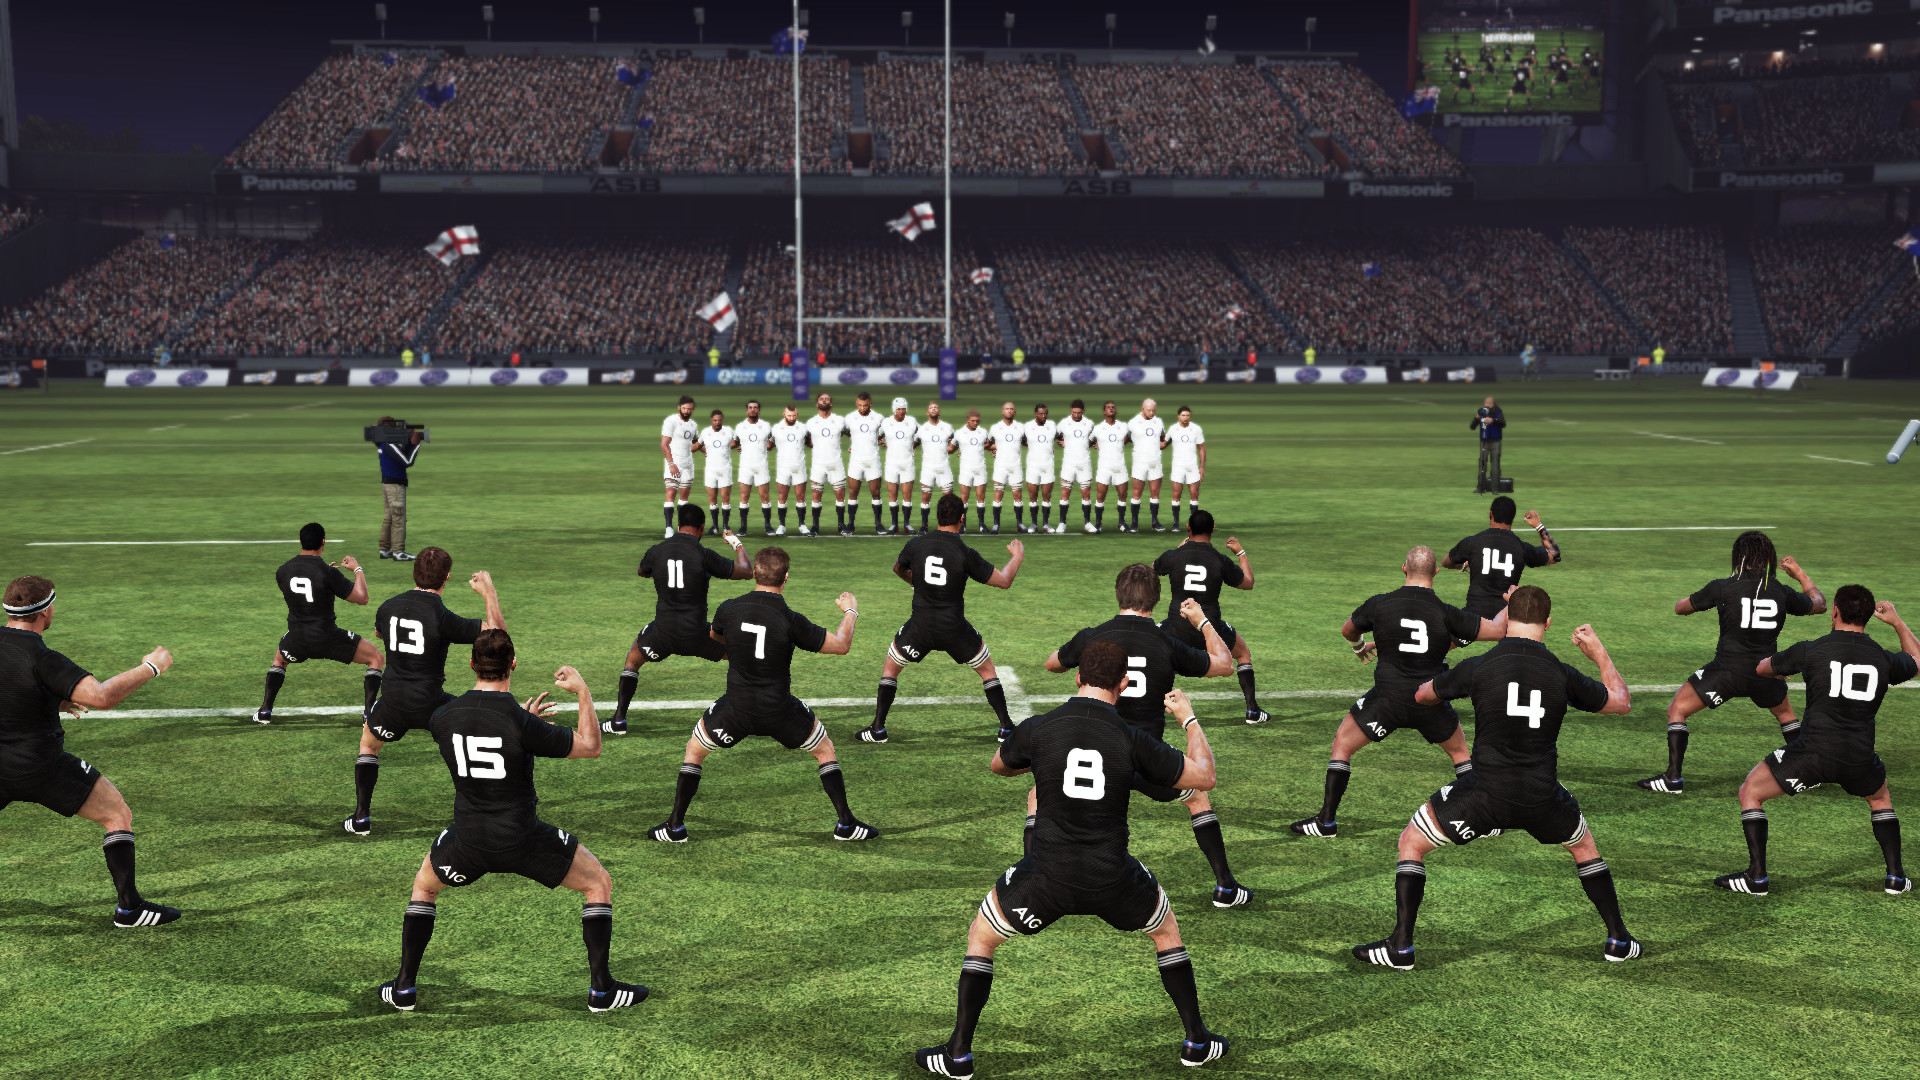 rugby challenge 3 release